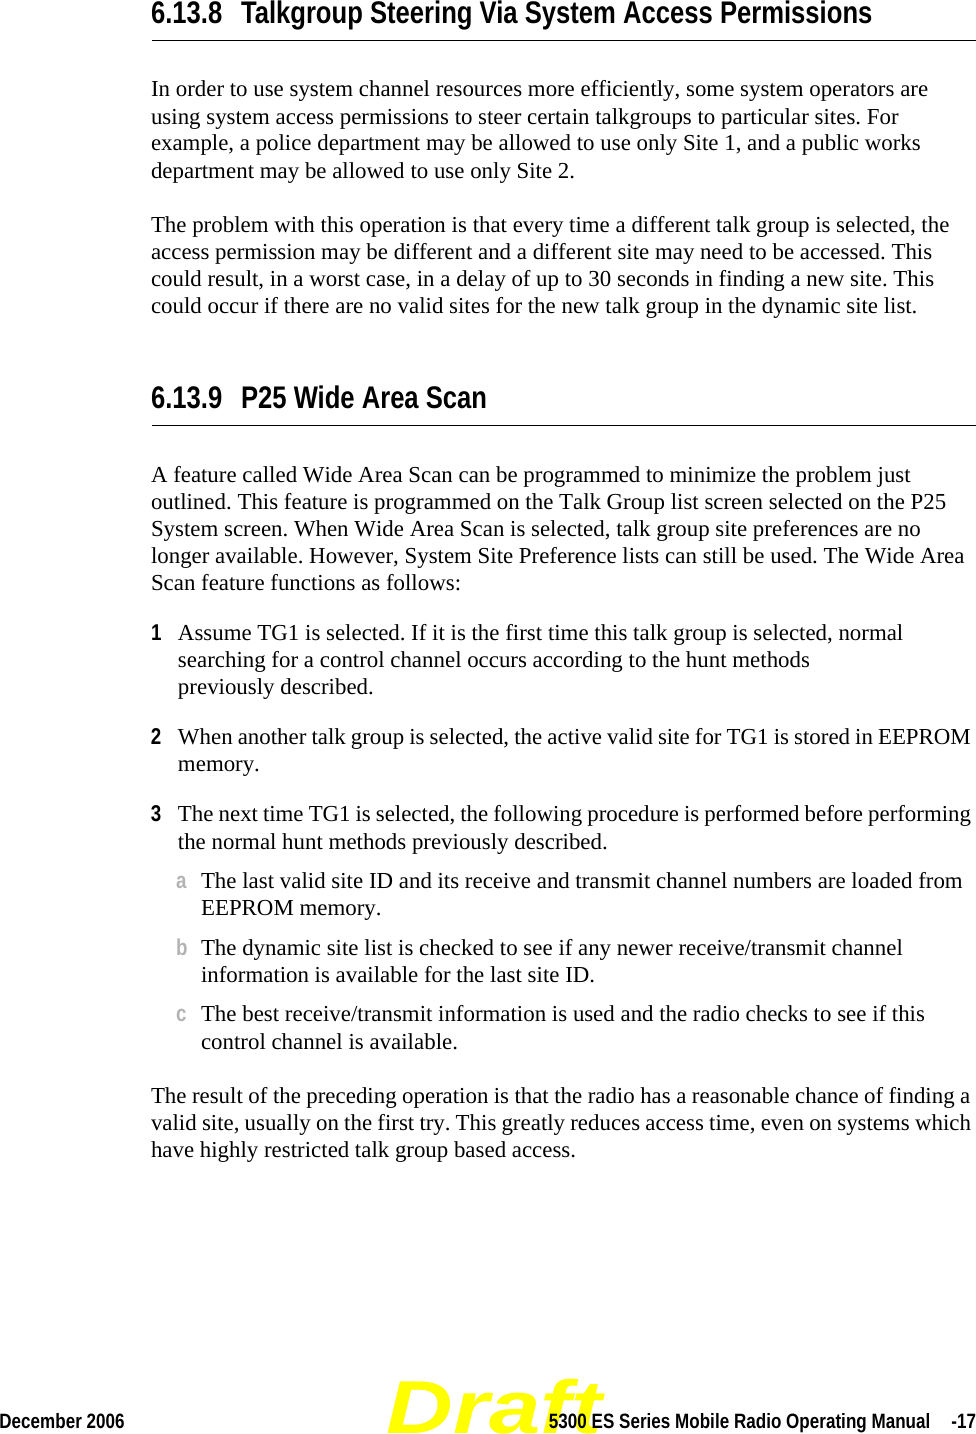 DraftDecember 2006 5300 ES Series Mobile Radio Operating Manual  -176.13.8 Talkgroup Steering Via System Access PermissionsIn order to use system channel resources more efficiently, some system operators are using system access permissions to steer certain talkgroups to particular sites. For example, a police department may be allowed to use only Site 1, and a public works department may be allowed to use only Site 2.The problem with this operation is that every time a different talk group is selected, the access permission may be different and a different site may need to be accessed. This could result, in a worst case, in a delay of up to 30 seconds in finding a new site. This could occur if there are no valid sites for the new talk group in the dynamic site list.6.13.9 P25 Wide Area ScanA feature called Wide Area Scan can be programmed to minimize the problem just outlined. This feature is programmed on the Talk Group list screen selected on the P25 System screen. When Wide Area Scan is selected, talk group site preferences are no longer available. However, System Site Preference lists can still be used. The Wide Area Scan feature functions as follows:1Assume TG1 is selected. If it is the first time this talk group is selected, normal searching for a control channel occurs according to the hunt methods  previously described.2When another talk group is selected, the active valid site for TG1 is stored in EEPROM memory.3The next time TG1 is selected, the following procedure is performed before performing the normal hunt methods previously described.aThe last valid site ID and its receive and transmit channel numbers are loaded from EEPROM memory.bThe dynamic site list is checked to see if any newer receive/transmit channel information is available for the last site ID.cThe best receive/transmit information is used and the radio checks to see if this control channel is available.The result of the preceding operation is that the radio has a reasonable chance of finding a valid site, usually on the first try. This greatly reduces access time, even on systems which have highly restricted talk group based access.